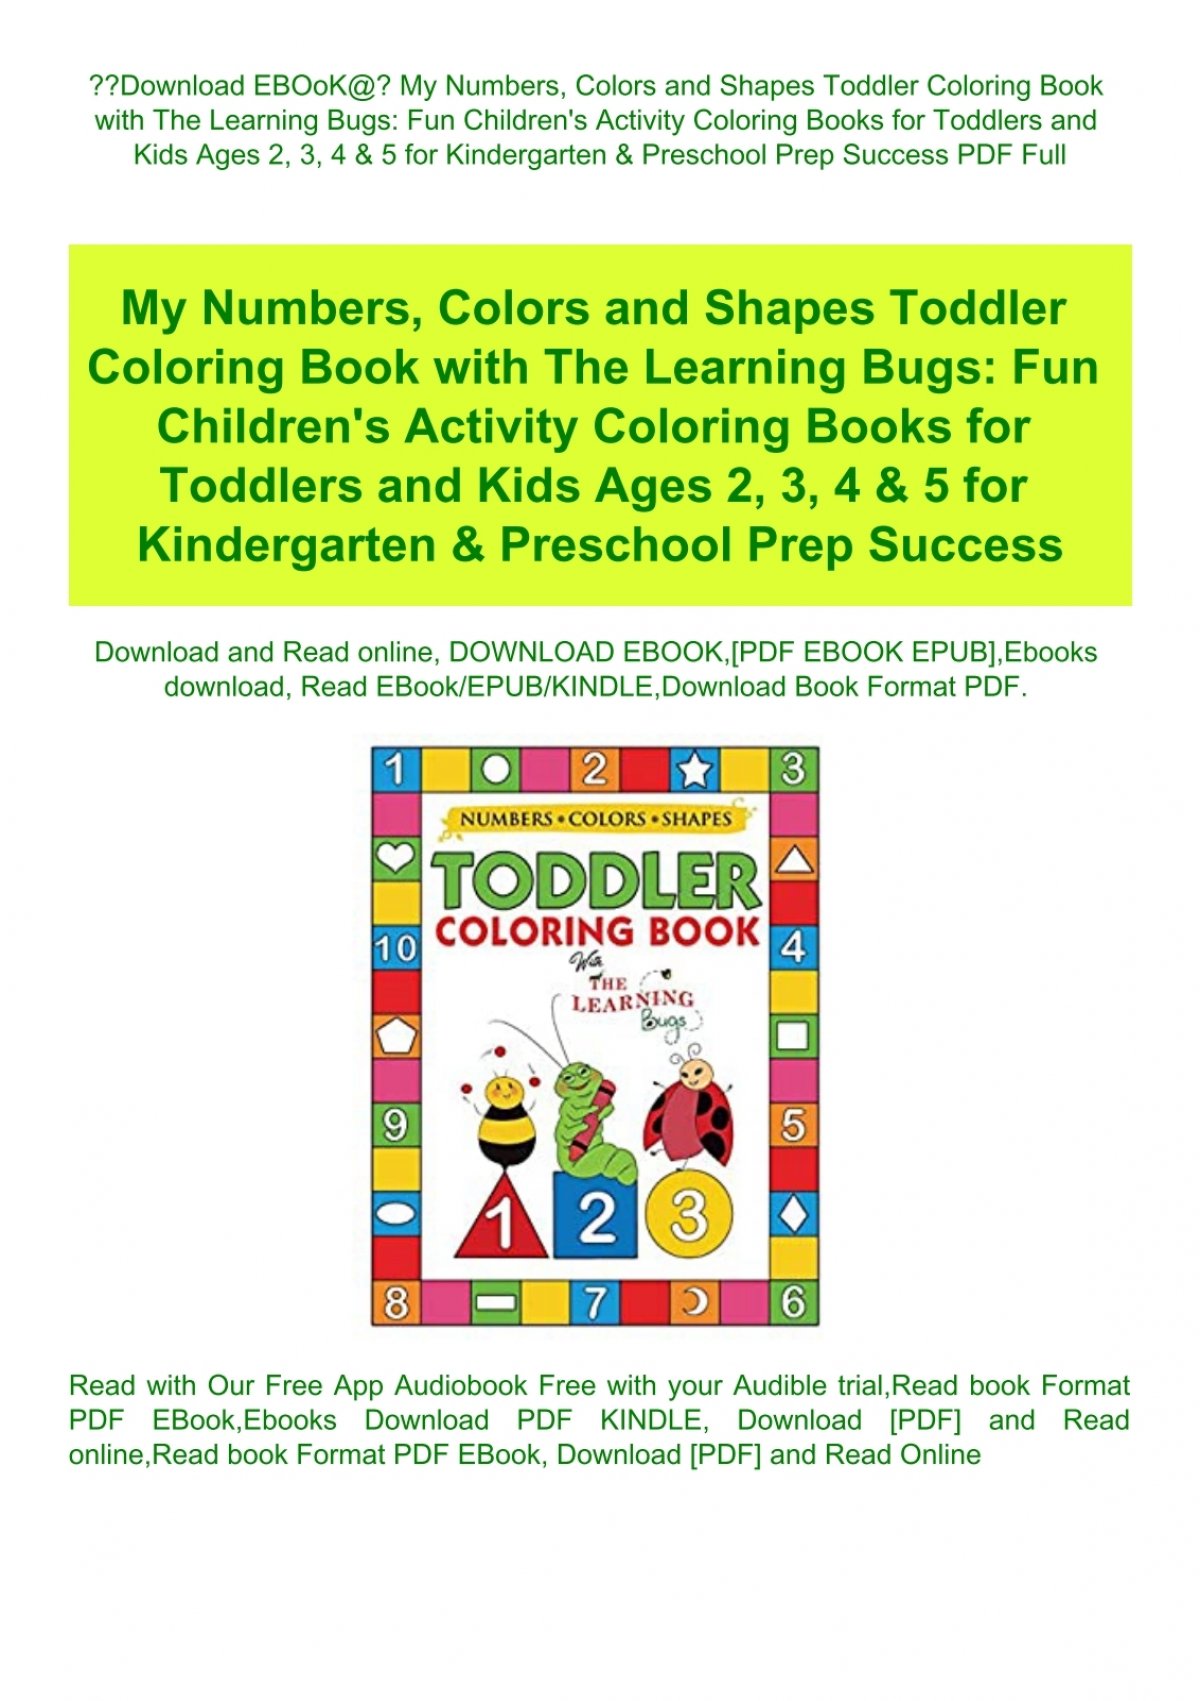 Download Download Ebook My Numbers Colors And Shapes Toddler Coloring Book With The Learning Bugs Fun Children Amp Amp 039 S Activity Coloring Books For Toddlers And Kids Ages 2 3 4 Amp Amp Amp 5 For Kindergarten Amp Amp Amp